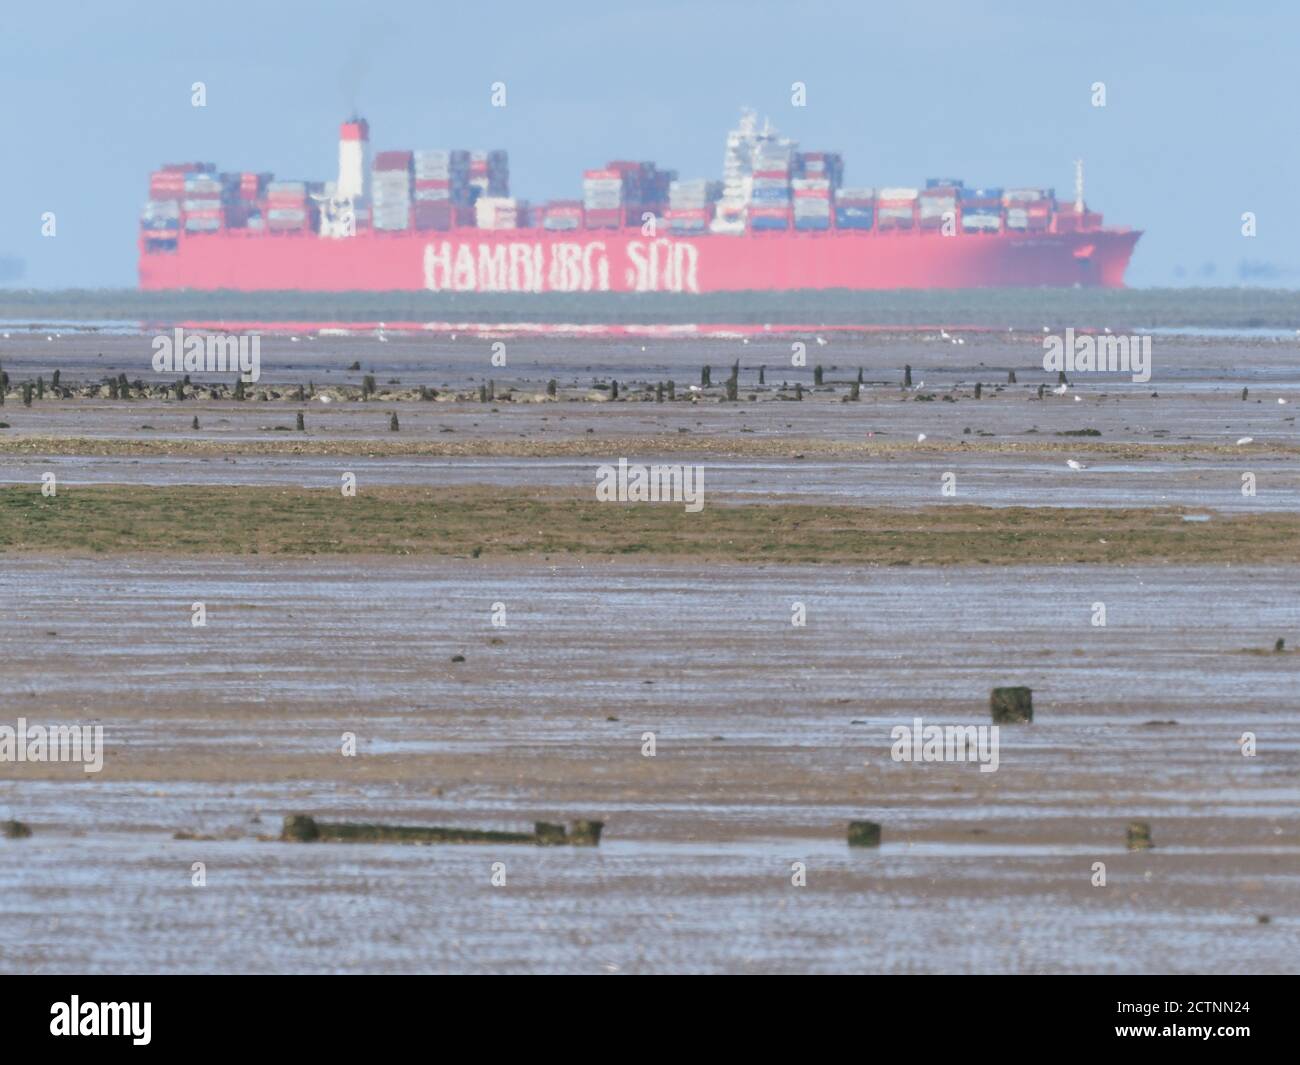 Shellness, Kent, UK. 24th September, 2020. UK Weather: sunny blue skies in Shellness, Kent but feeling slightly cooler. Cap San Raphael containership seen in the distance across the mudflats. Credit: James Bell/Alamy Live News Stock Photo